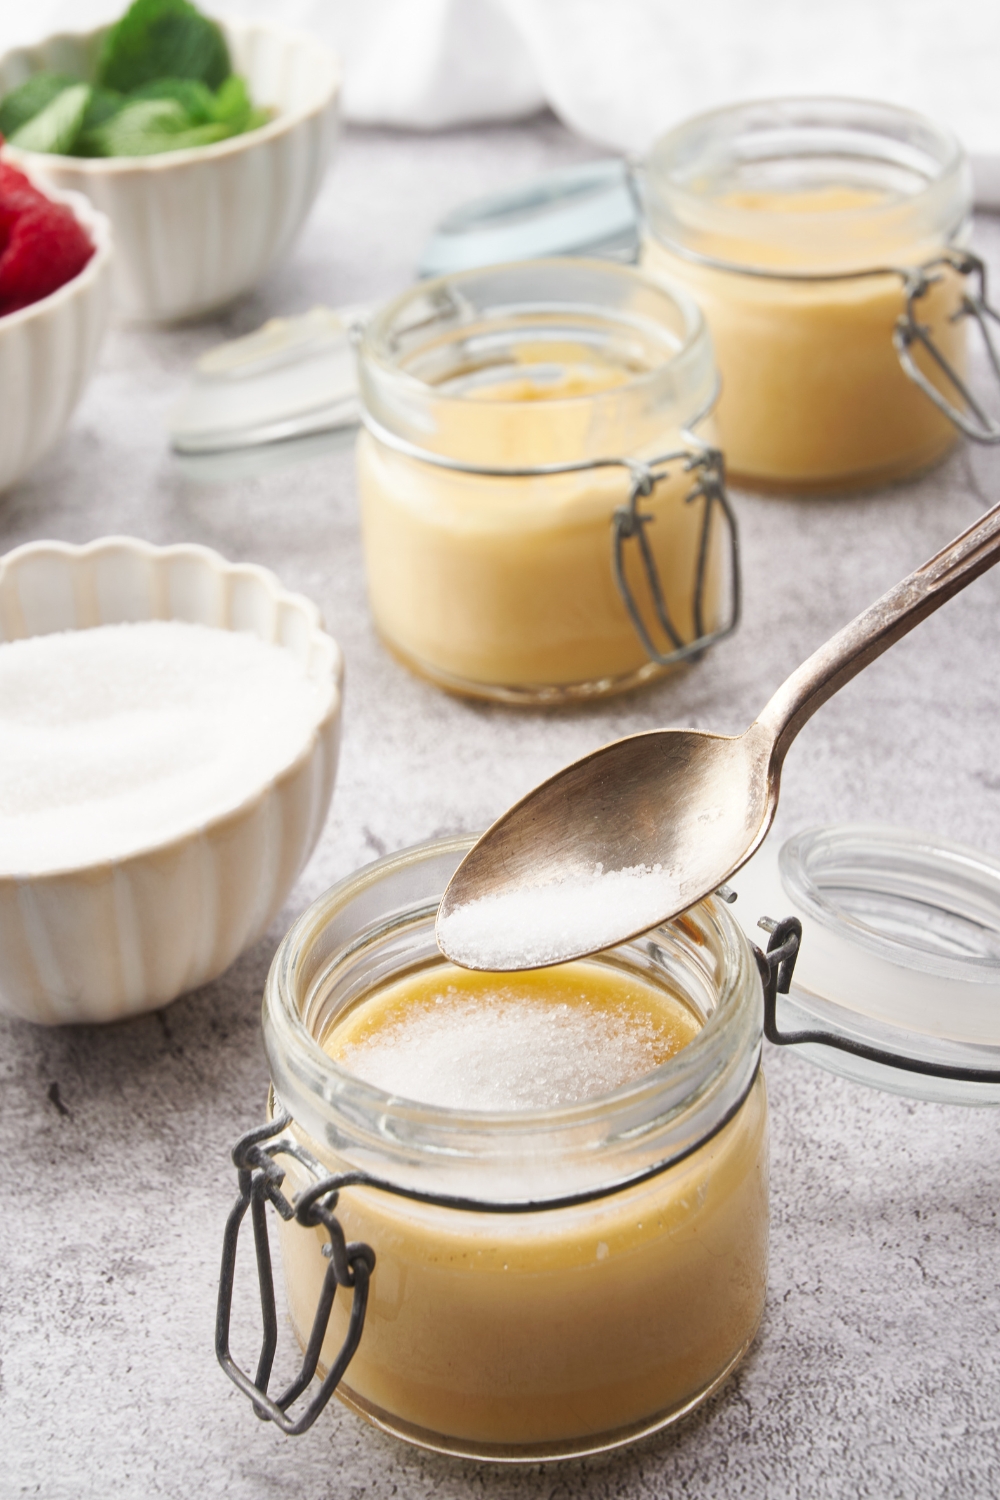 A spoon spooning sugar on top of a cooked jar of custard, with two more jars of custard in the background.